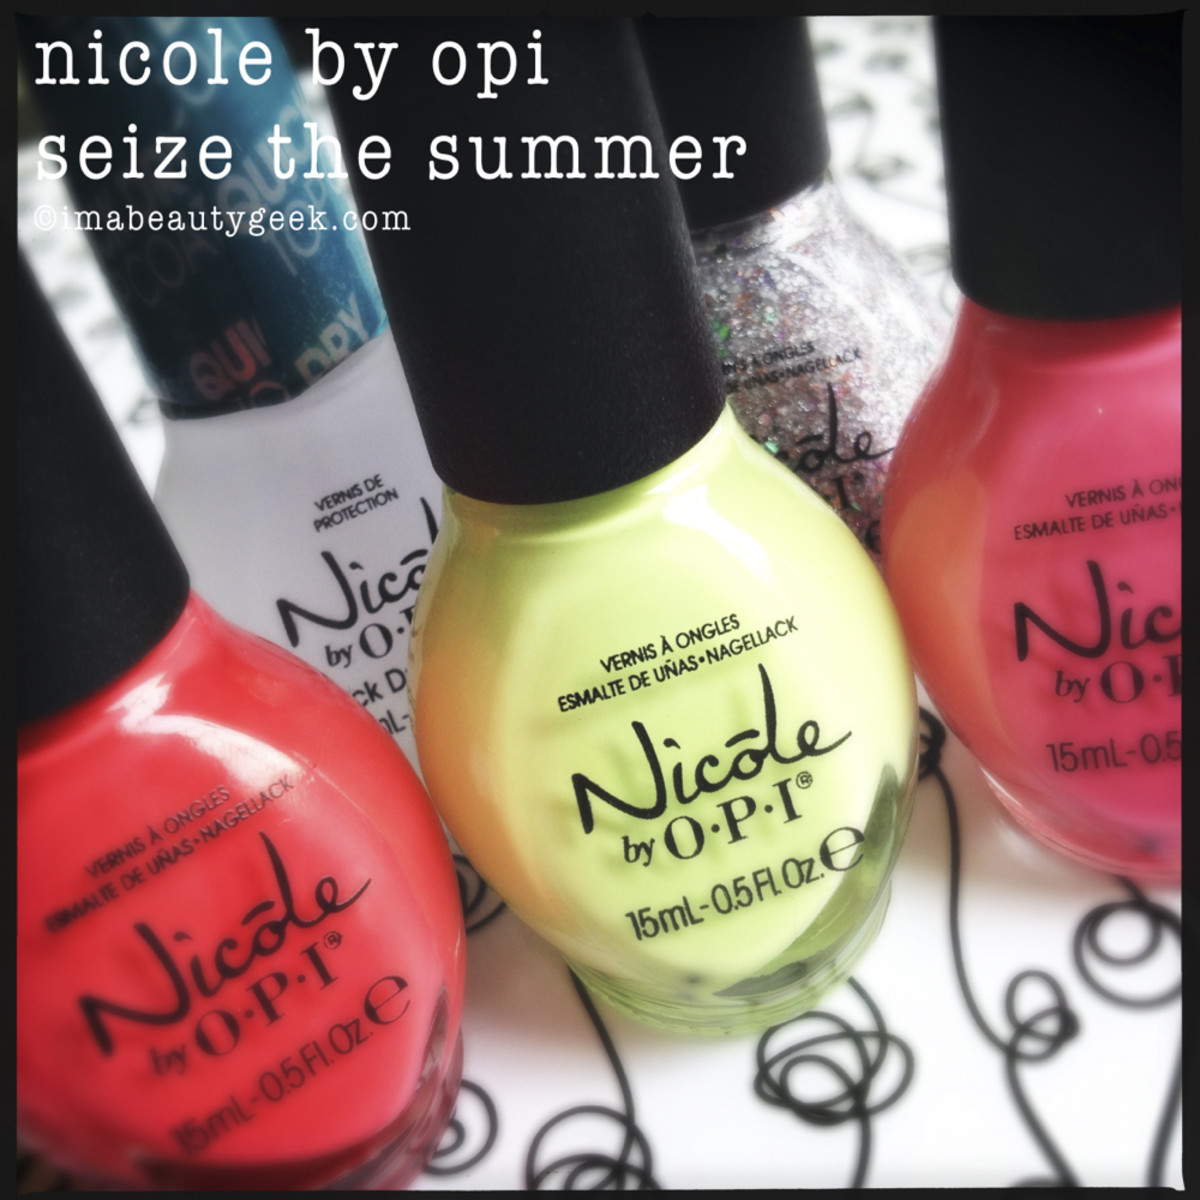 Nicole by OPI Summer 2014_Nicole by OPI Seize the Summer 2014